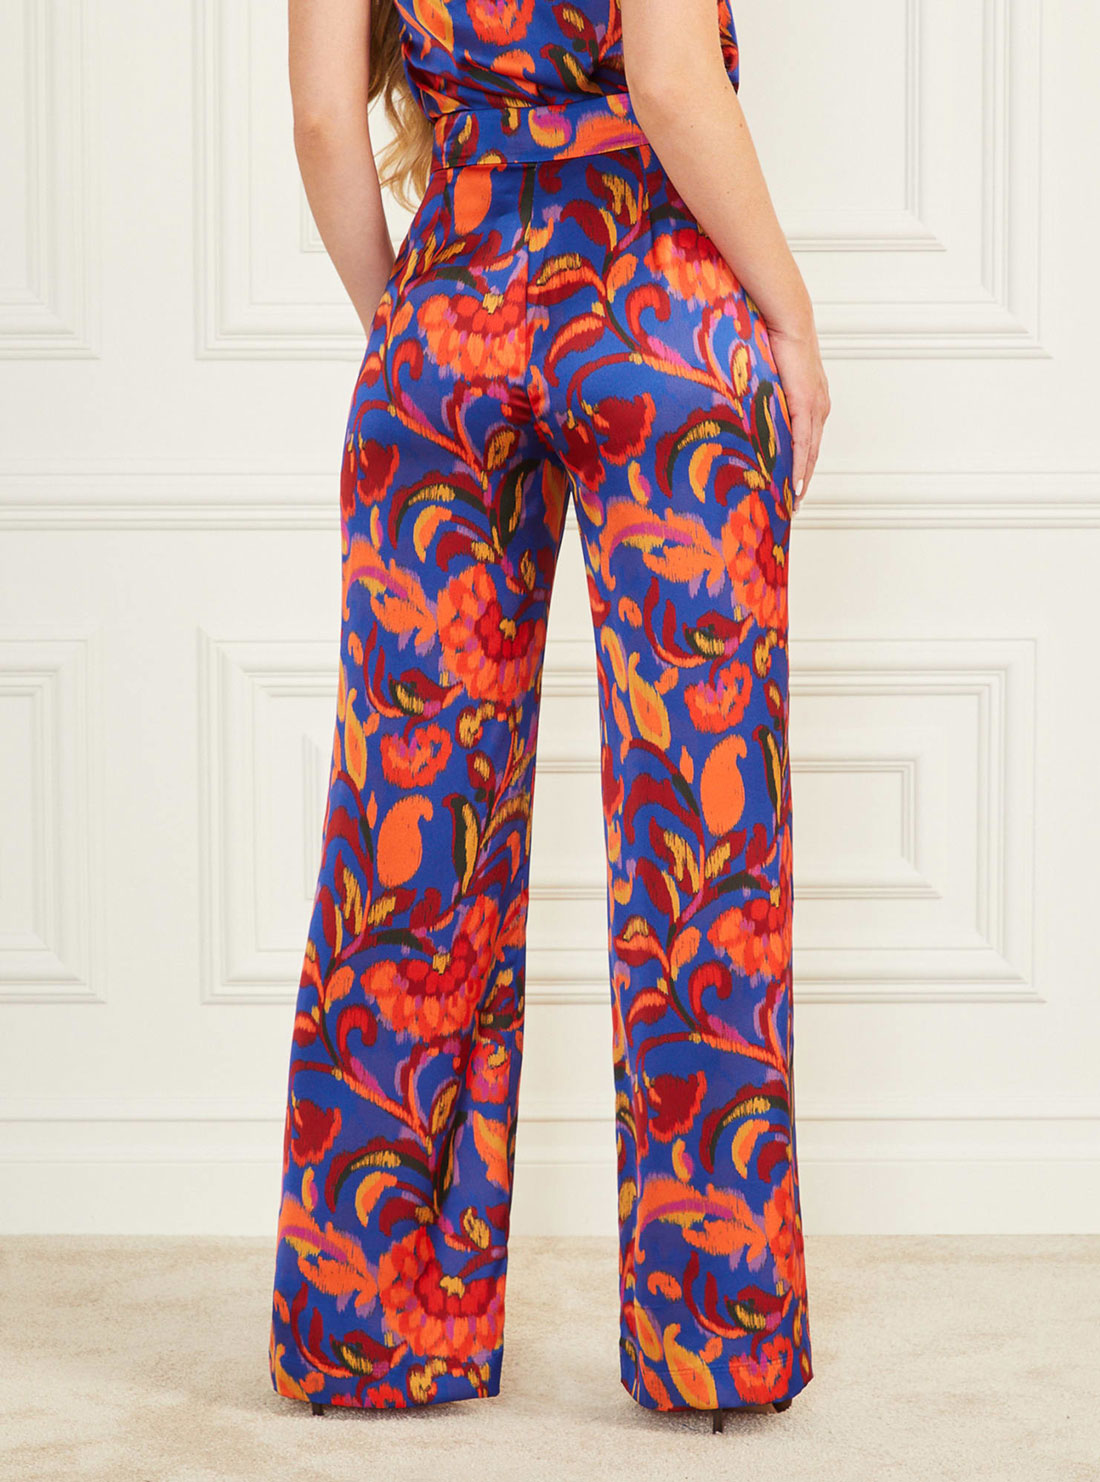 Marciano Betty Blue Printed Pants | GUESS Women's Apparel | back view